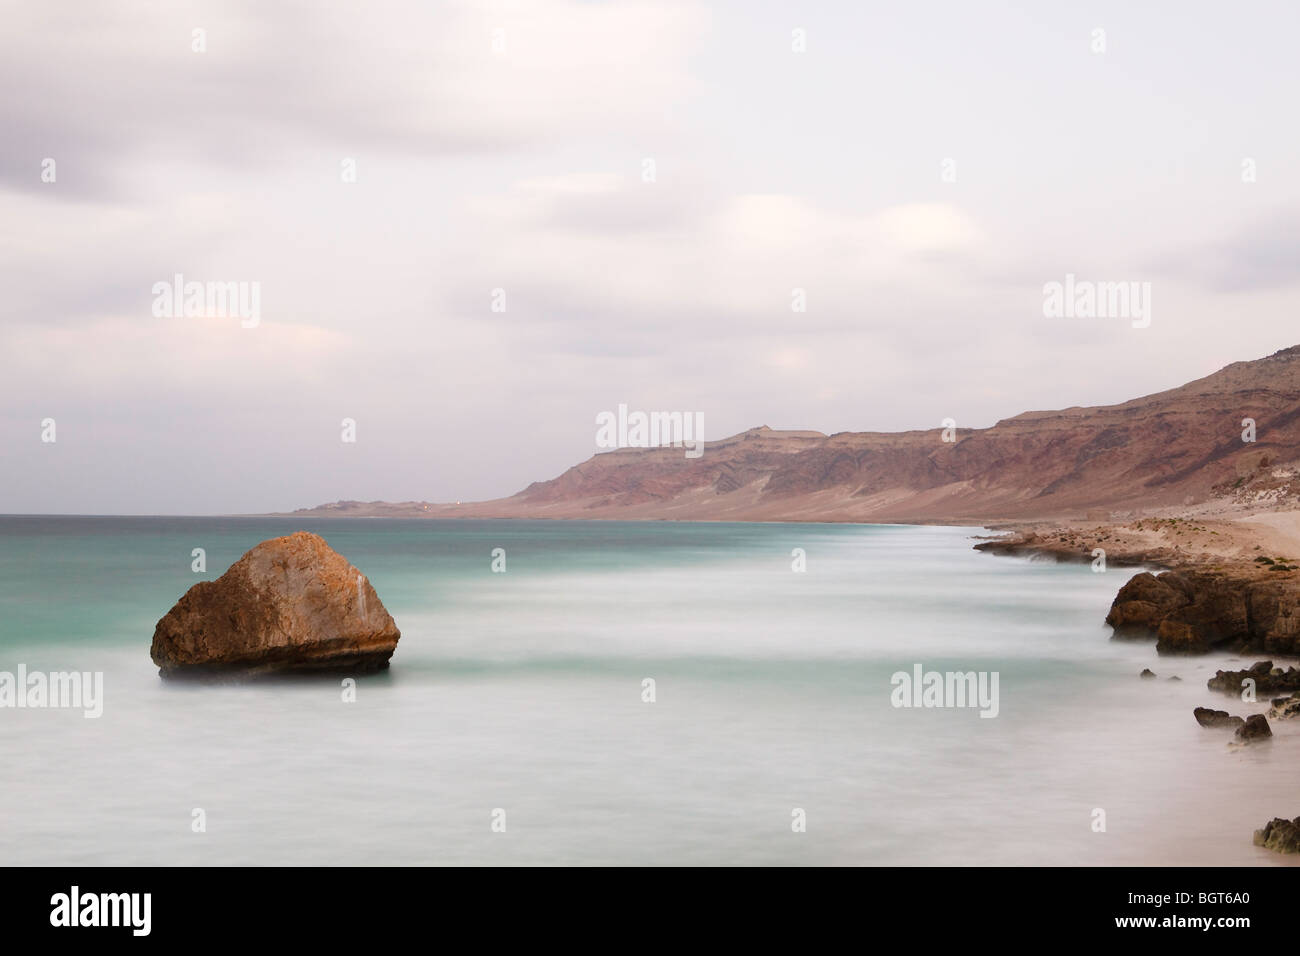 The coast at Arrarr after sunset, Socotra Stock Photo